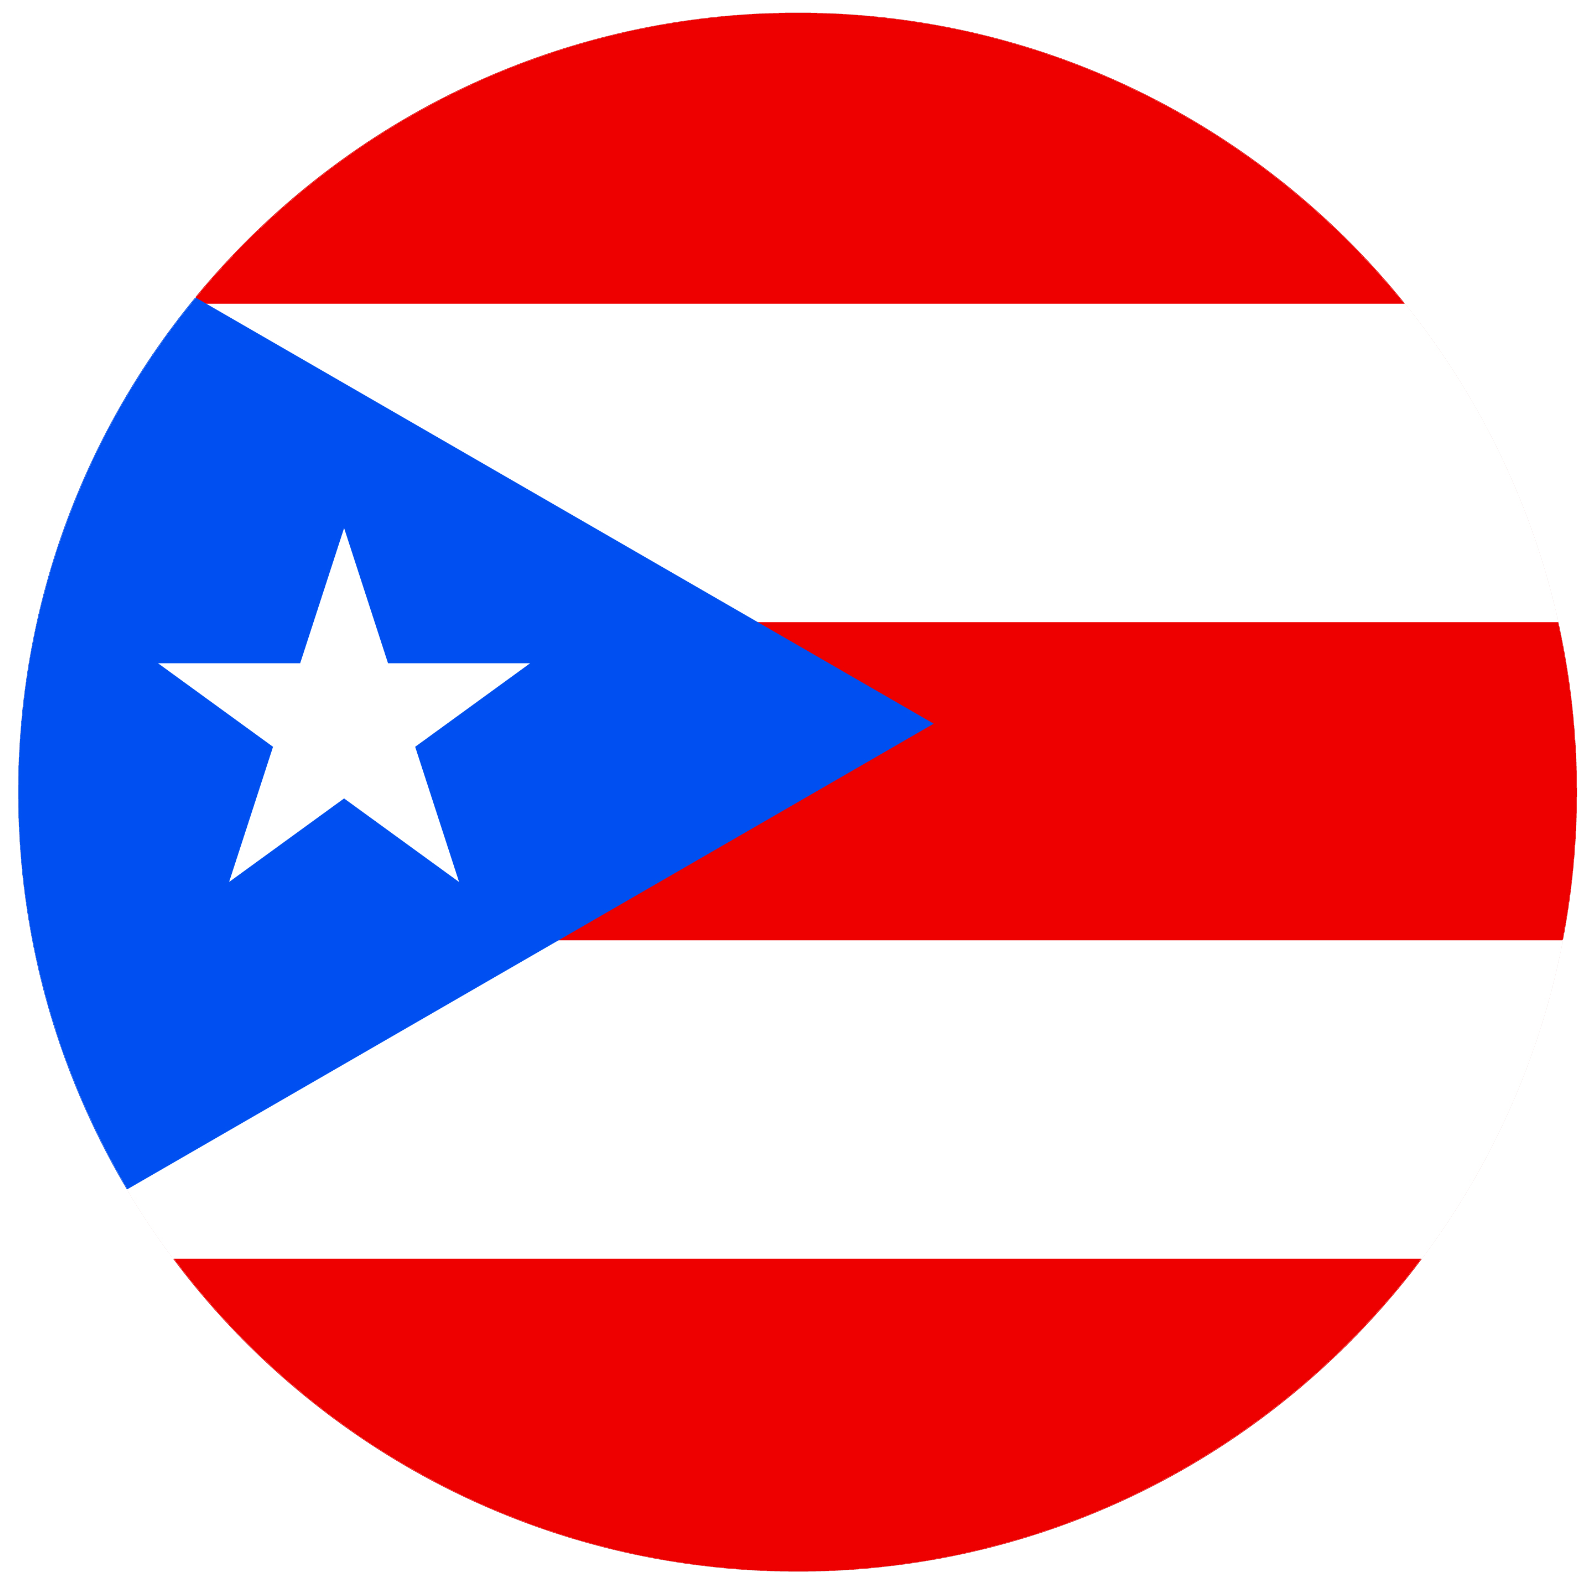 The flag of Puerto Rico, with its striking blue, red, and white design, tells a story of resilience and cultural pride.